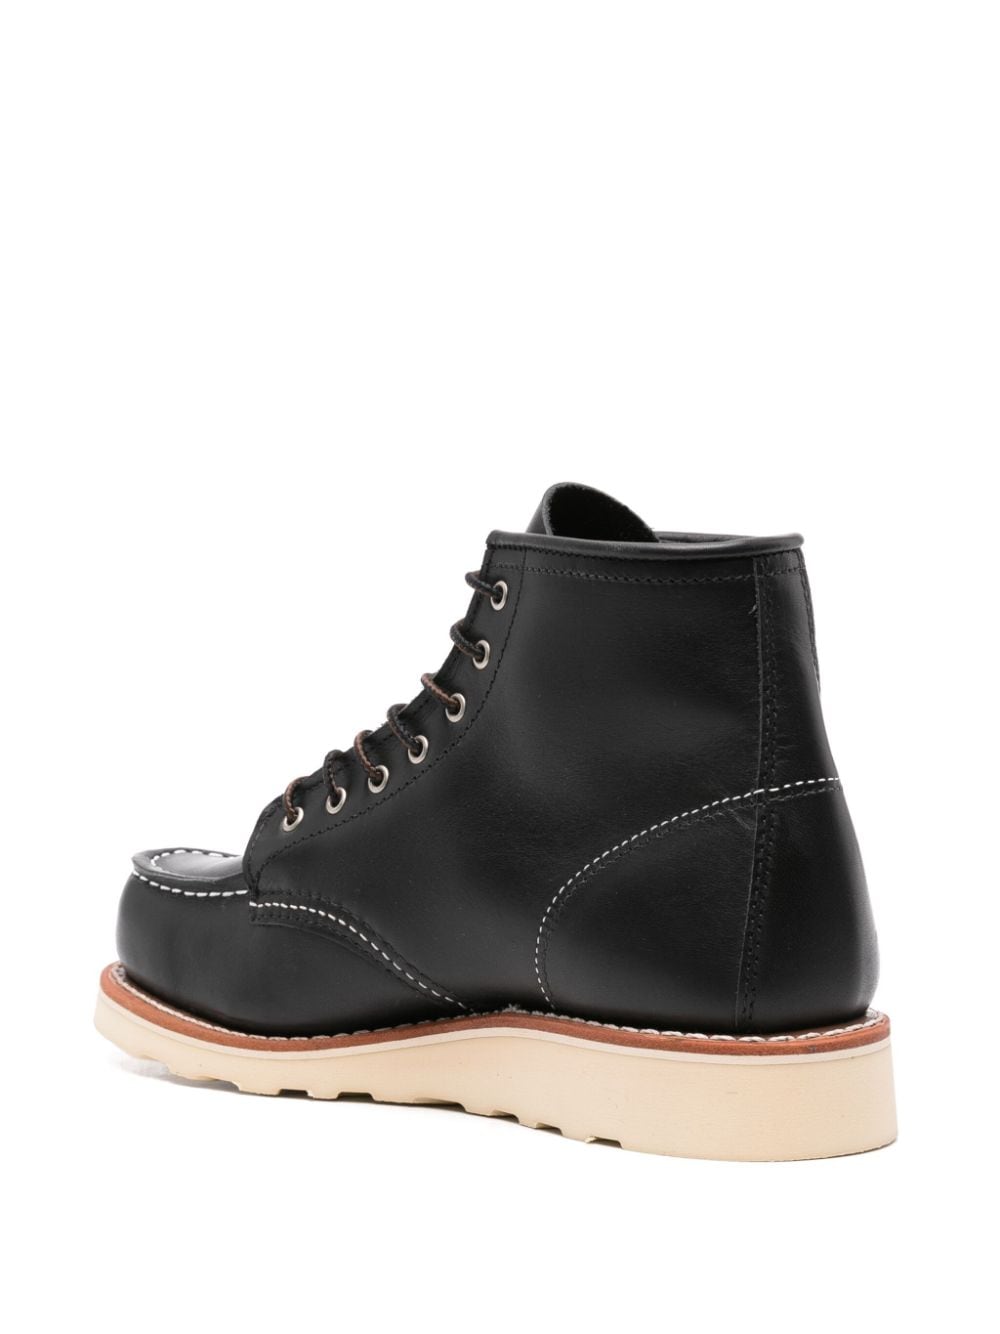 Red Wing Boots Black